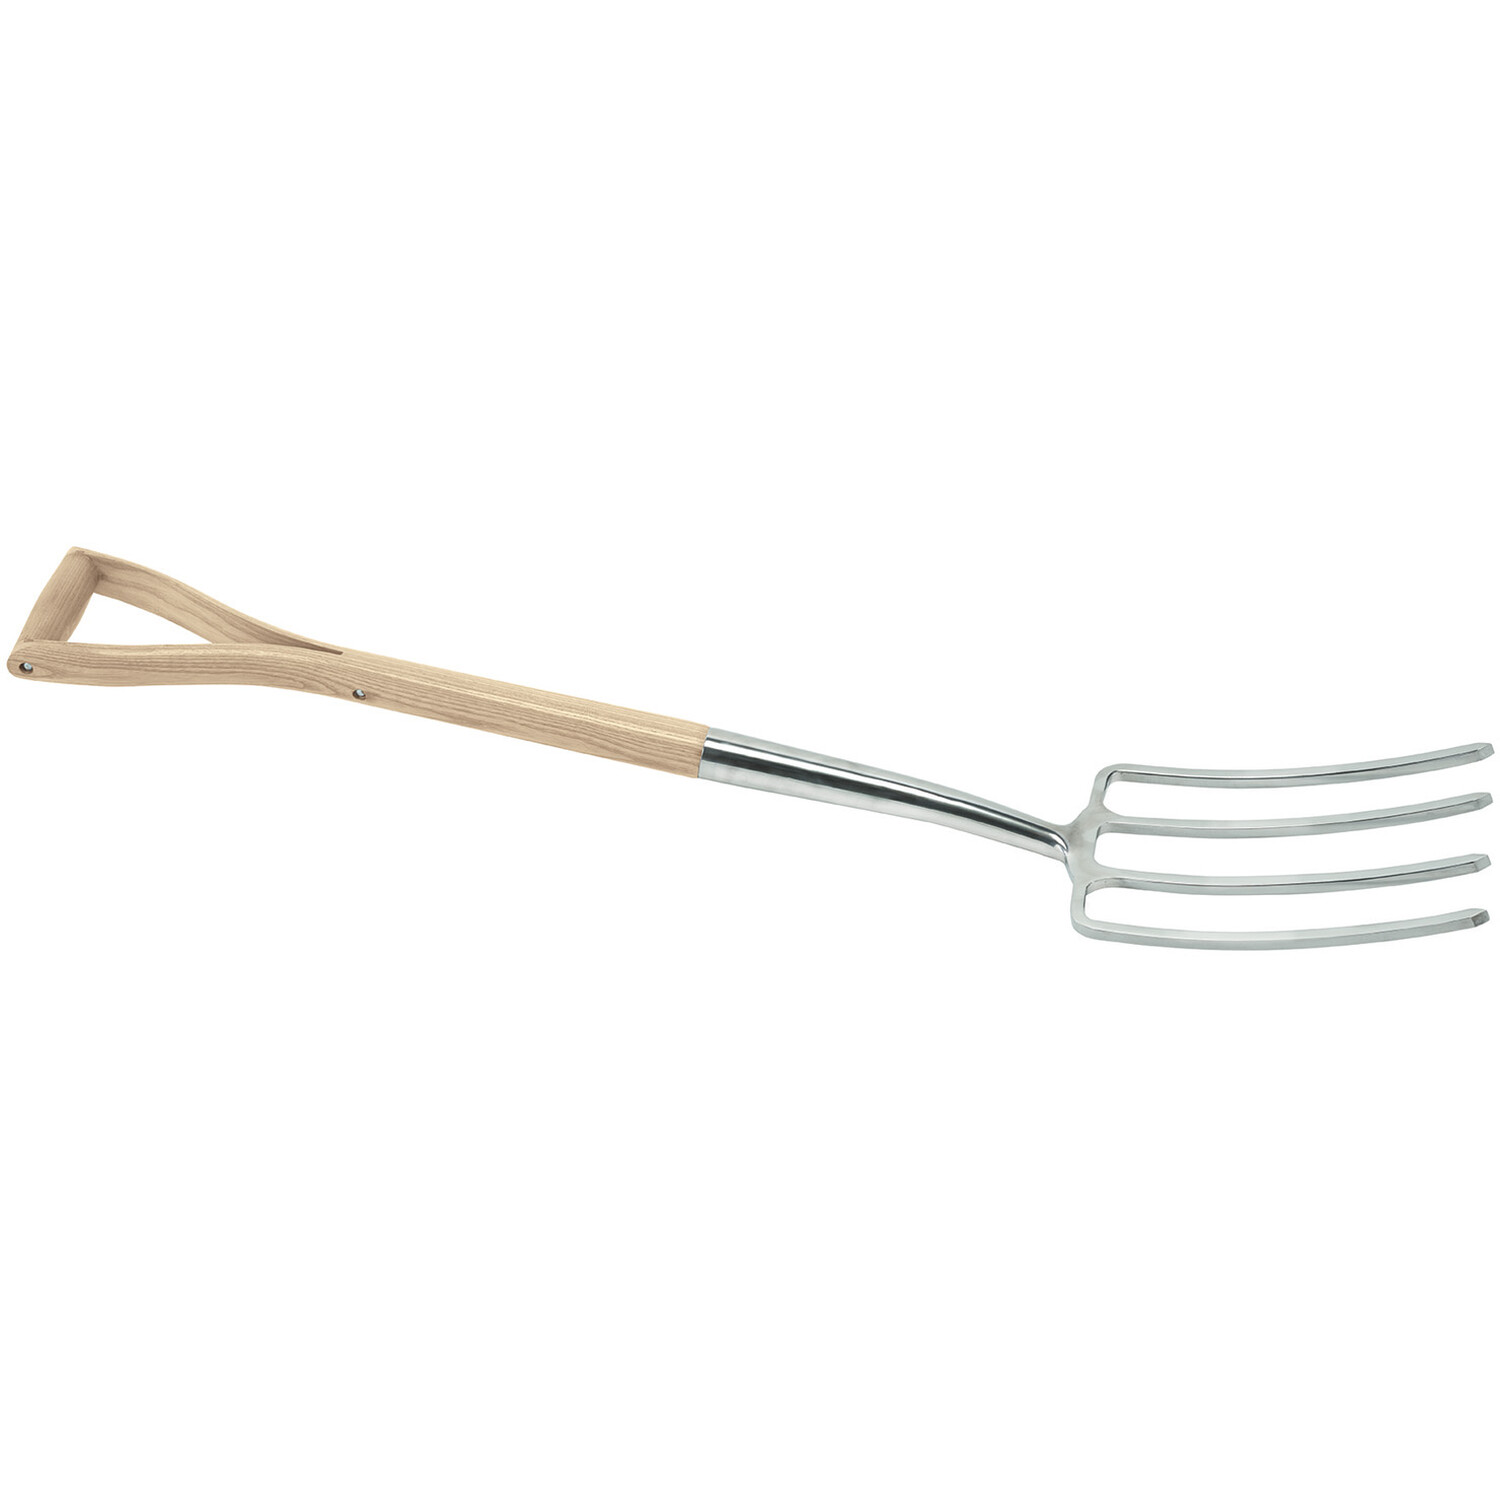 Draper Stainless Steel Digging Fork With Ash Handle Image 2